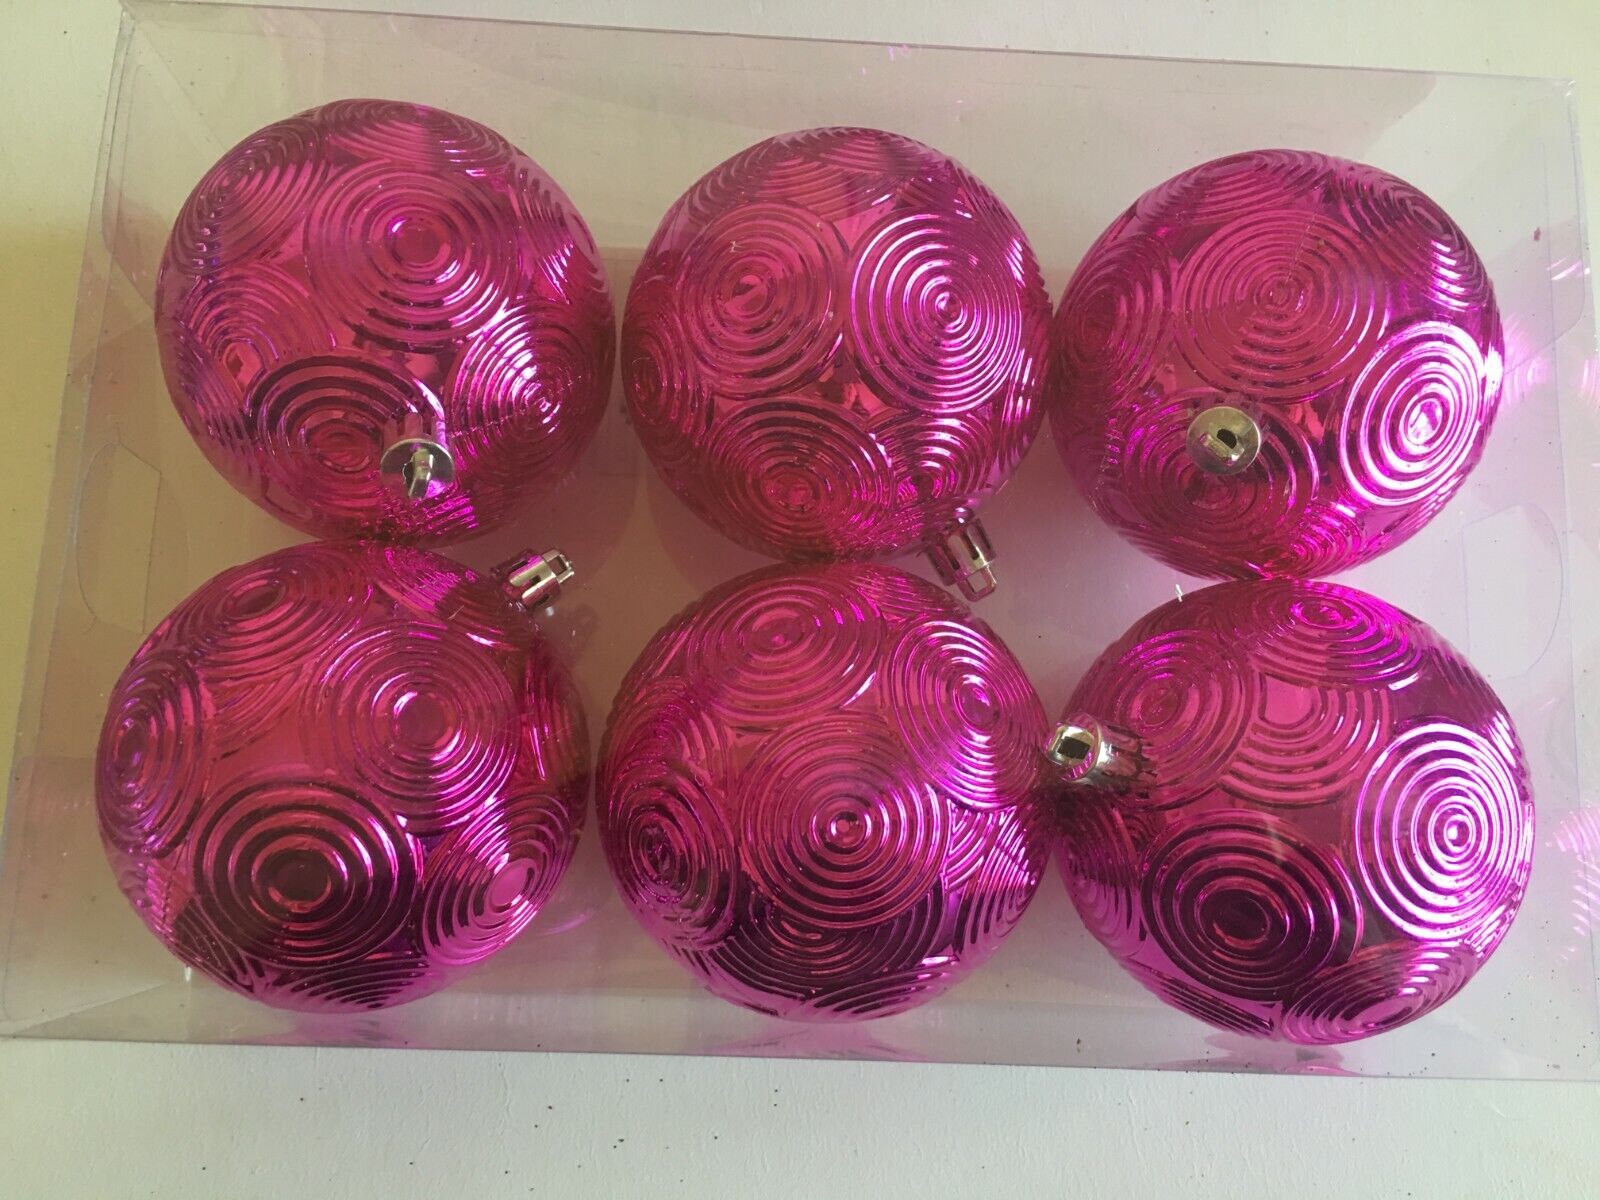 6 Popular shop is the lowest price challenge hot Pink Geometric Christmas Nippon regular agency Ornament 3 Inch Shatter Resistant